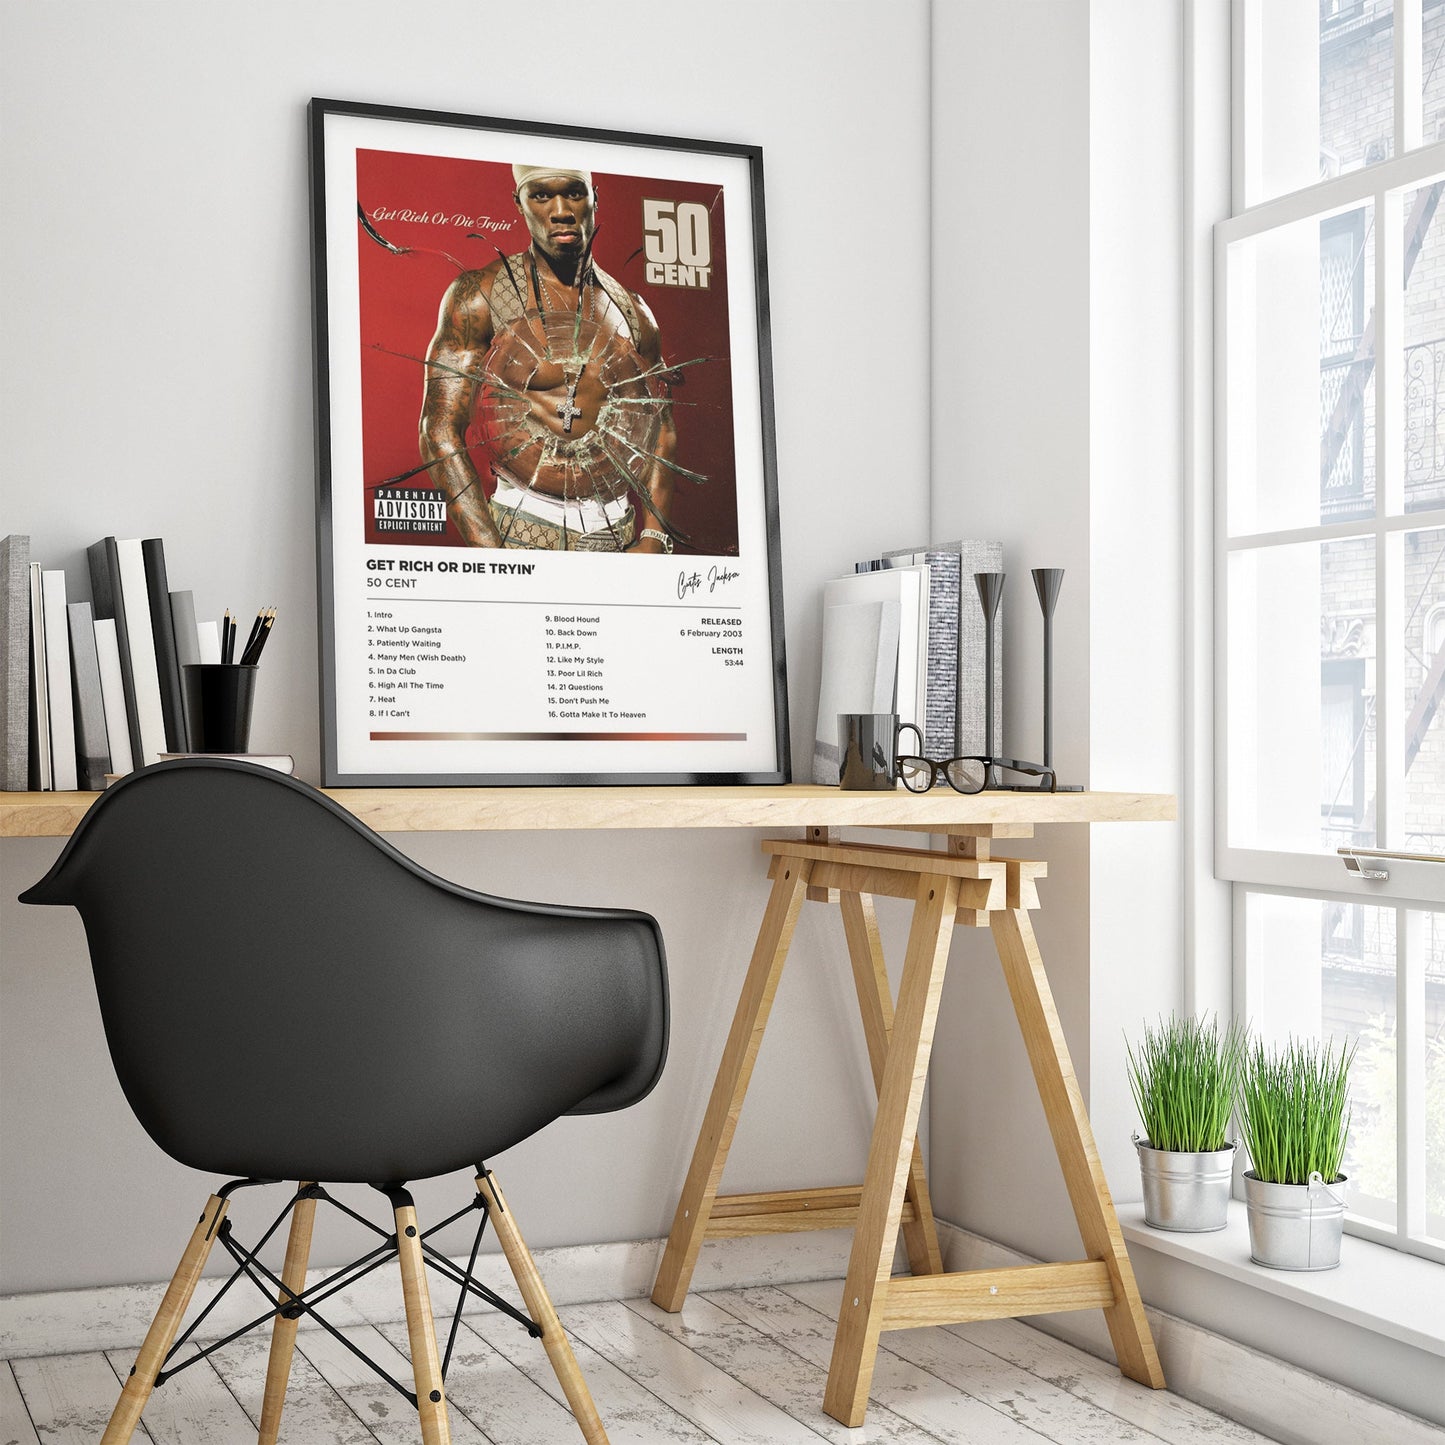 50 Cent - Get Rich Or Die Tryin' Framed Poster Print | Polaroid Style | Album Cover Artwork